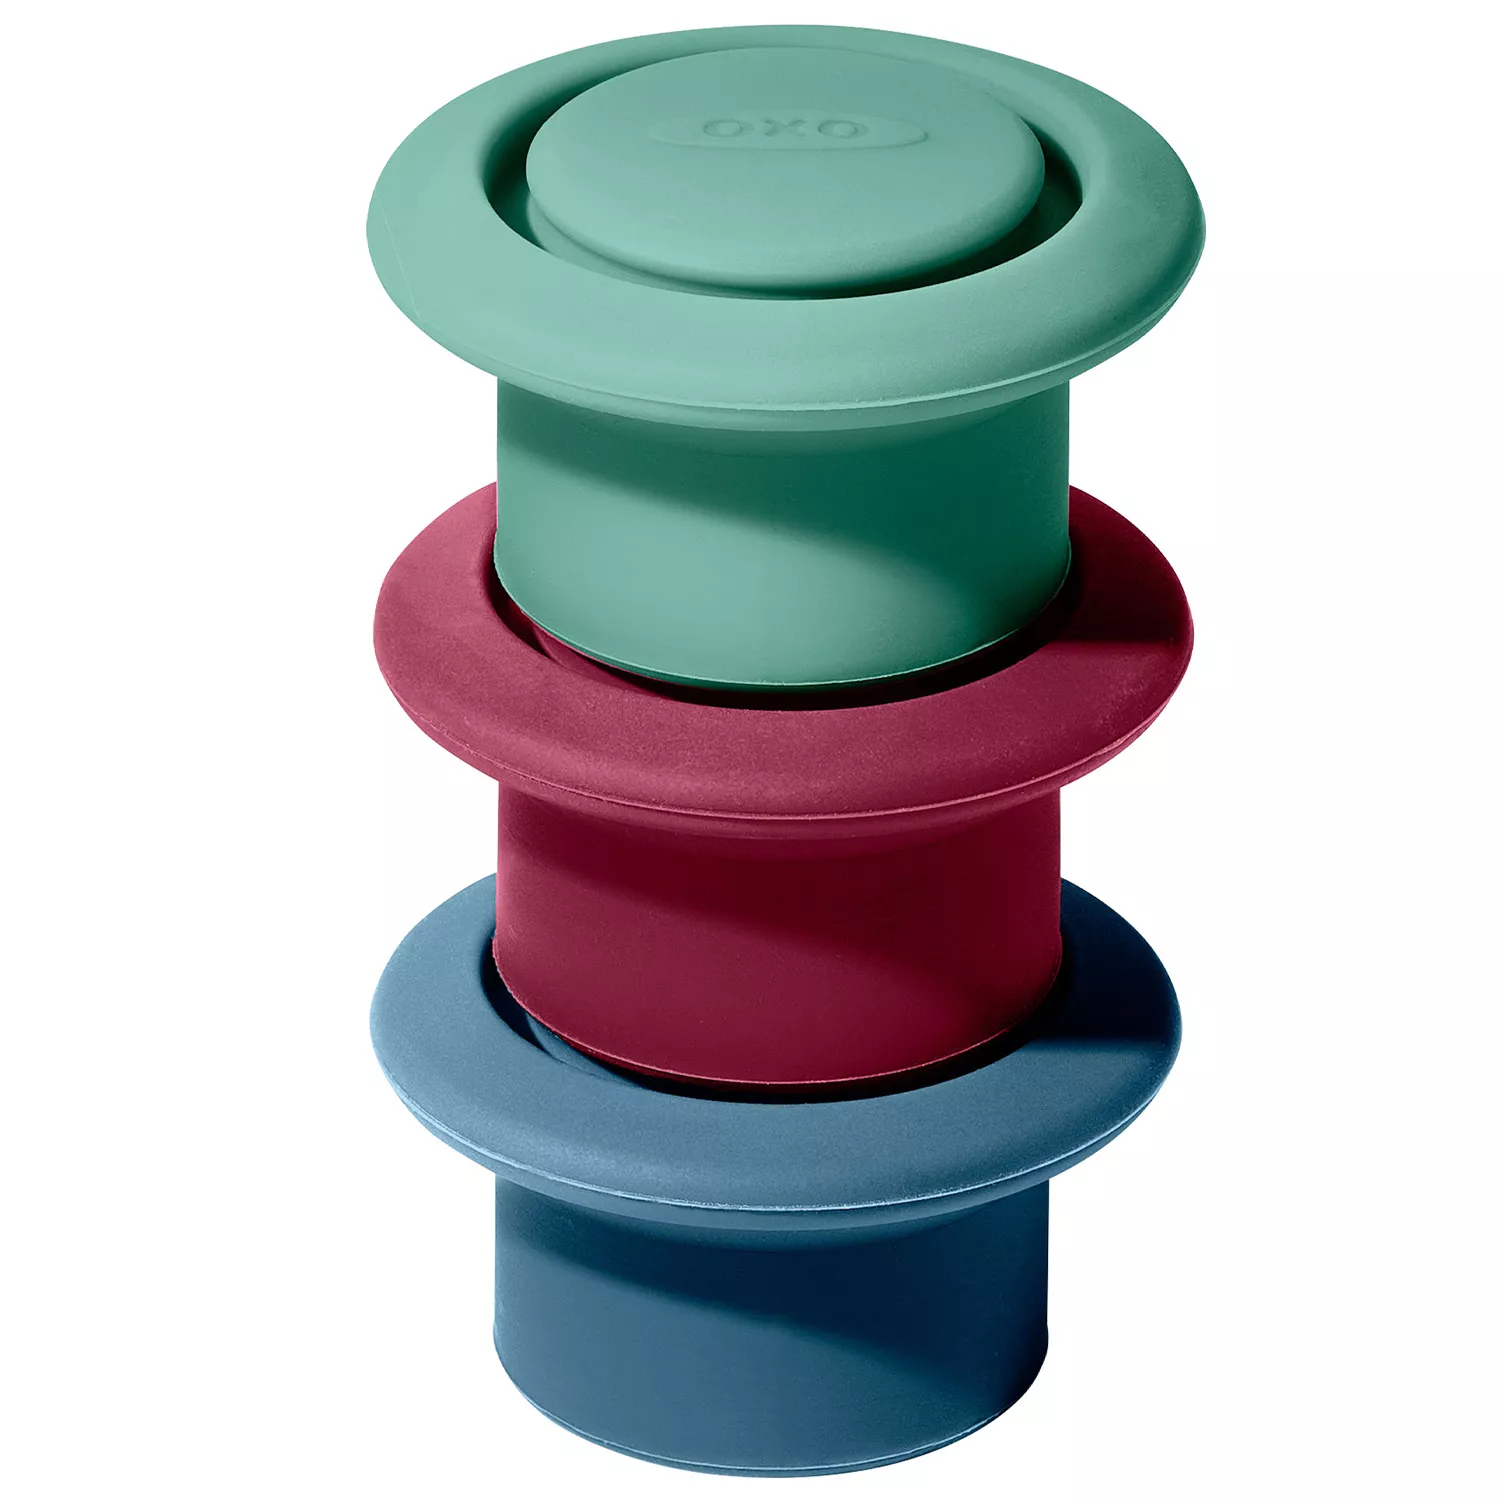 OXO Good Grips Silicone Wine Stoppers, Set of 3